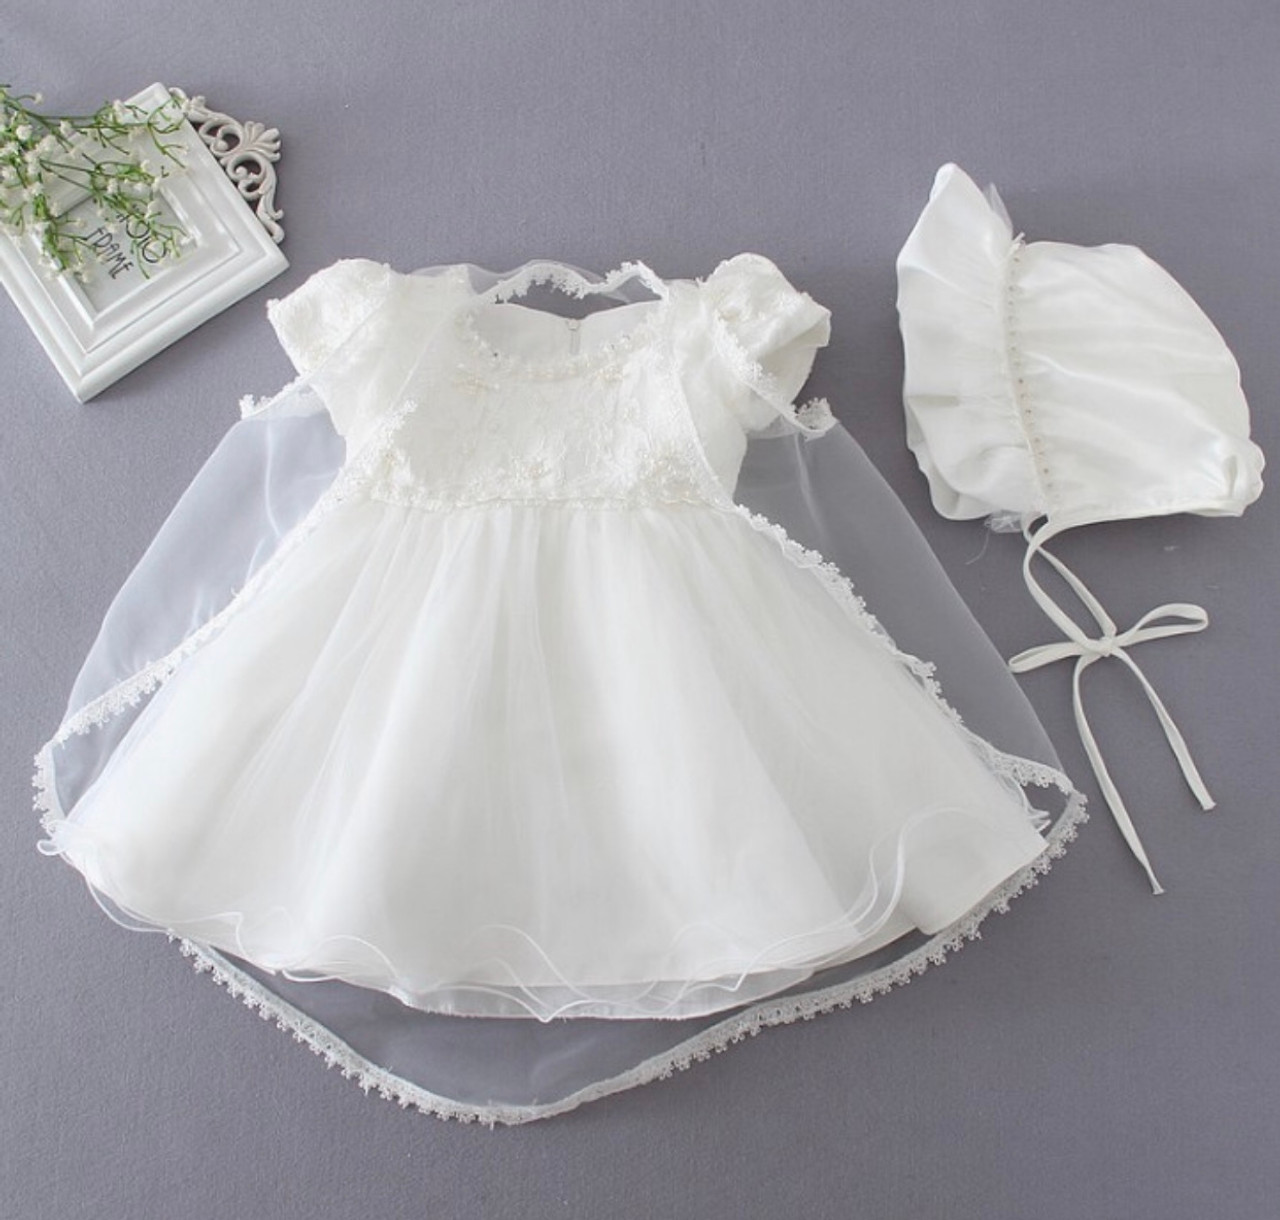 Buy Newdeve Long Baptism Dresses for Baby Girls Christening Gowns Toddler  with Bonnet at Amazon.in